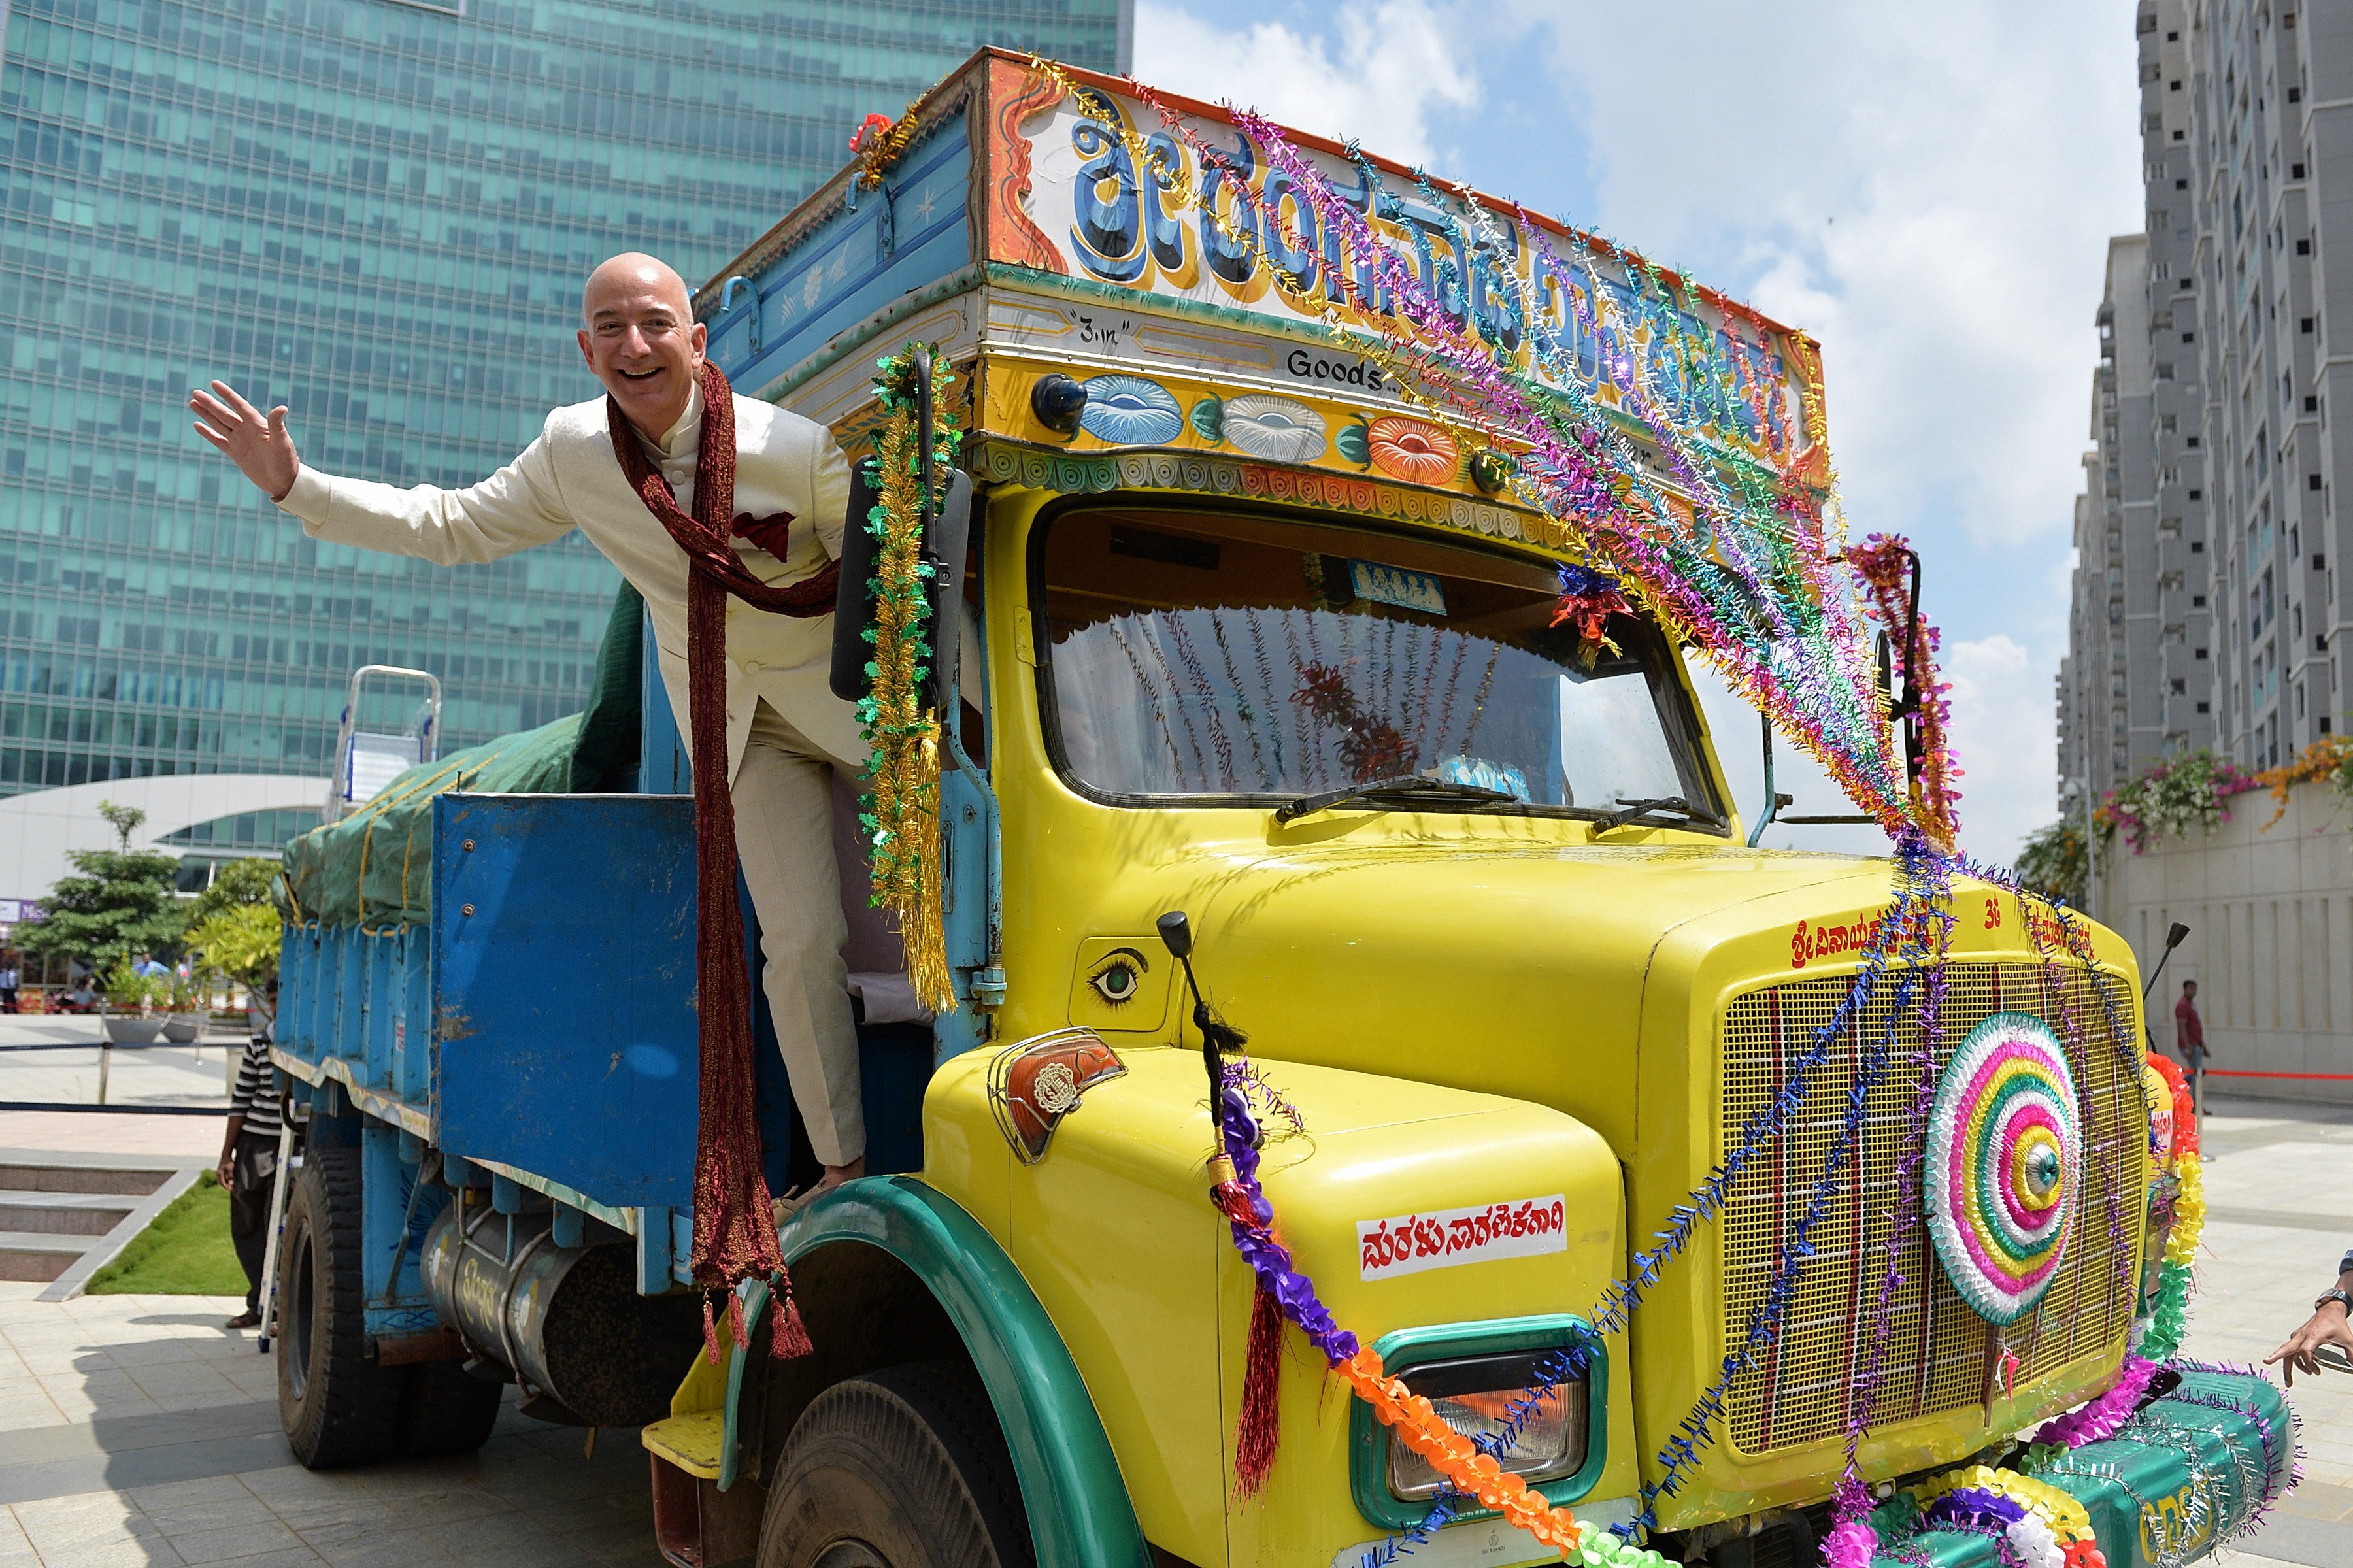 CEO of Amazon.com Jeff Bezos poses on a lorry in Bangalore on Sept. 28, 2014 (Manjunath Kiran—AFP/Getty Images)